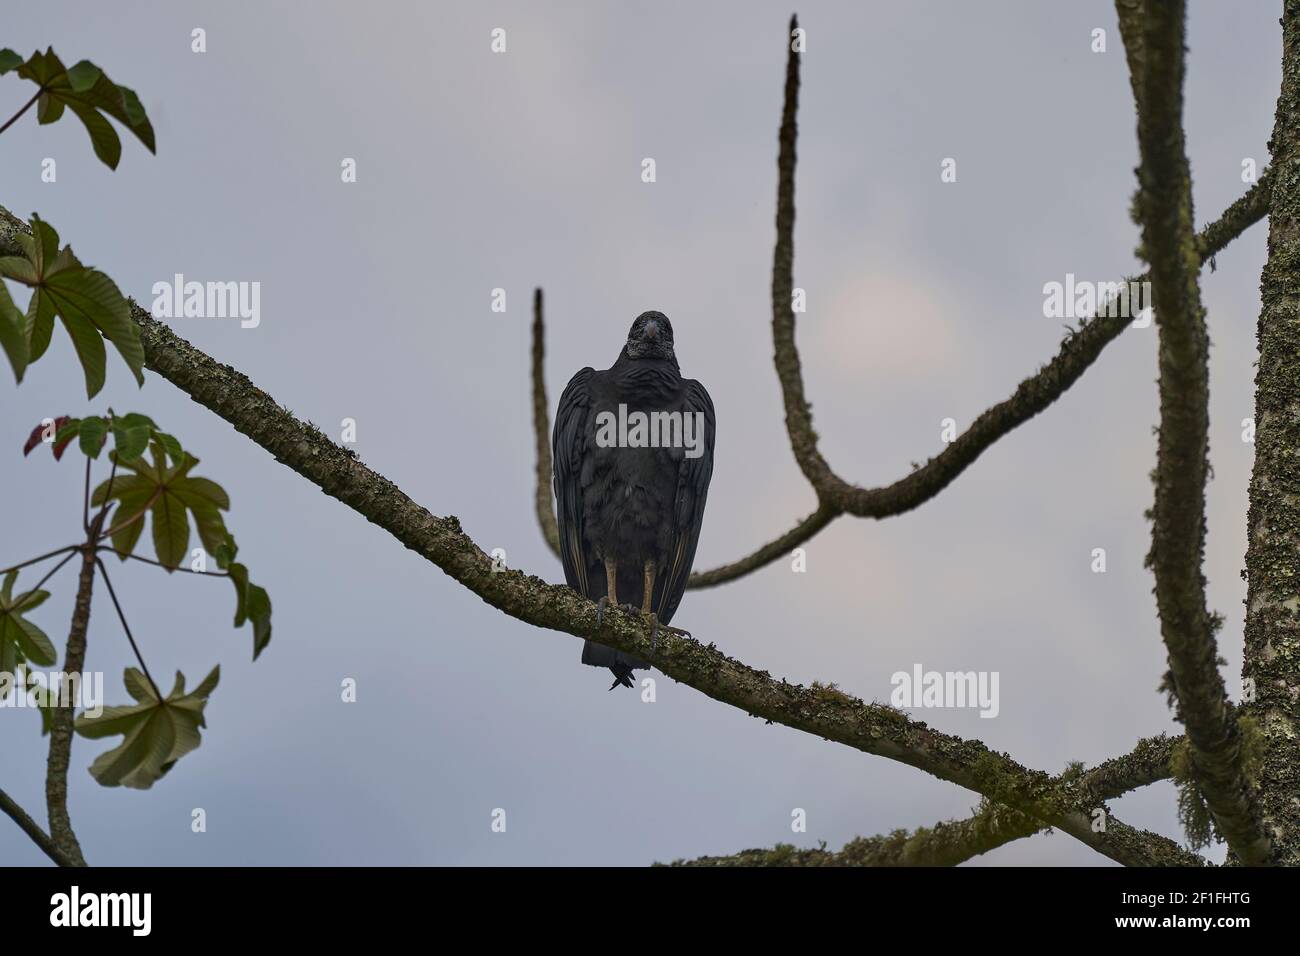 black vulture, Coragyps atratus, also known as American black vulture, a bird of the New World vulture family, perched on a branch of an exotic tree i Stock Photo